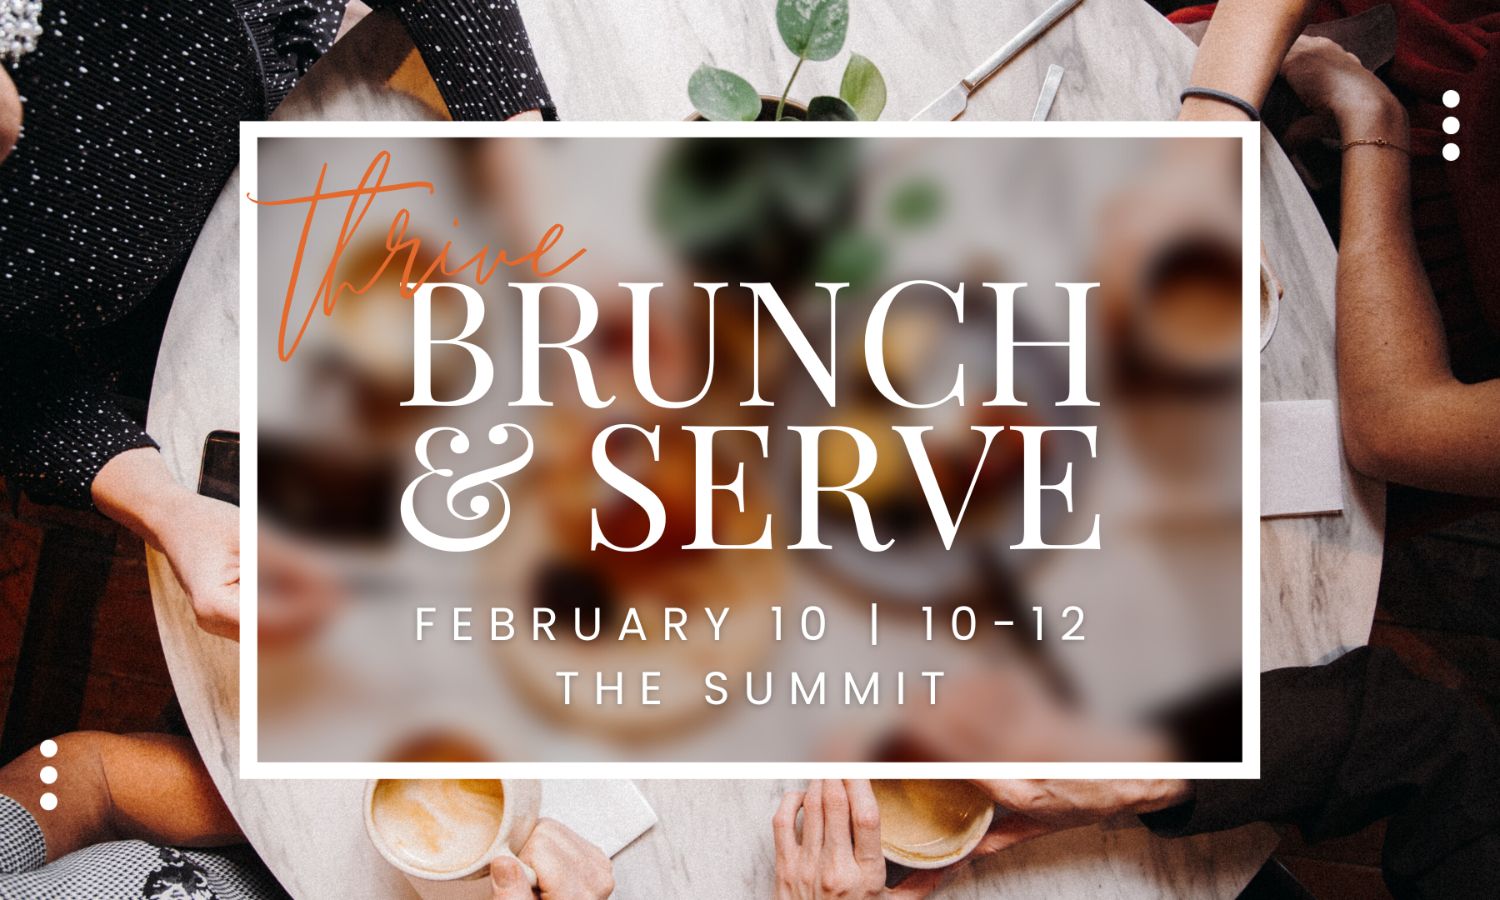 Thrive Brunch and Serve